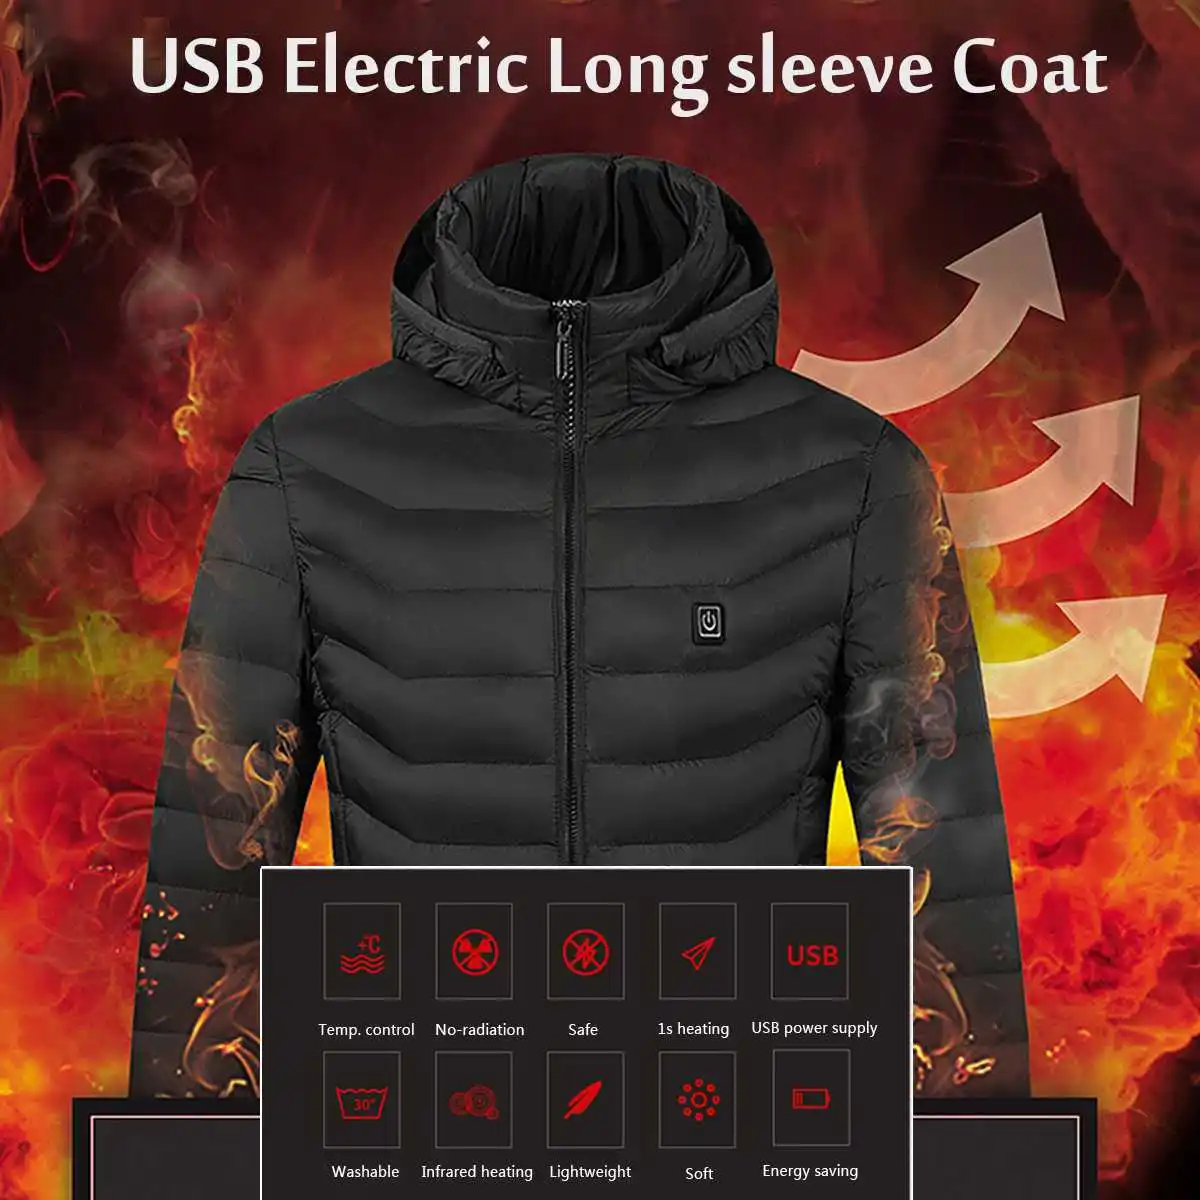 

2021 Upgrade 8 Heating Zones Mens Women Heated outdoor vest USB Electric Heated Hooded Long Sleeves Jacket Thermal Clothing Ski